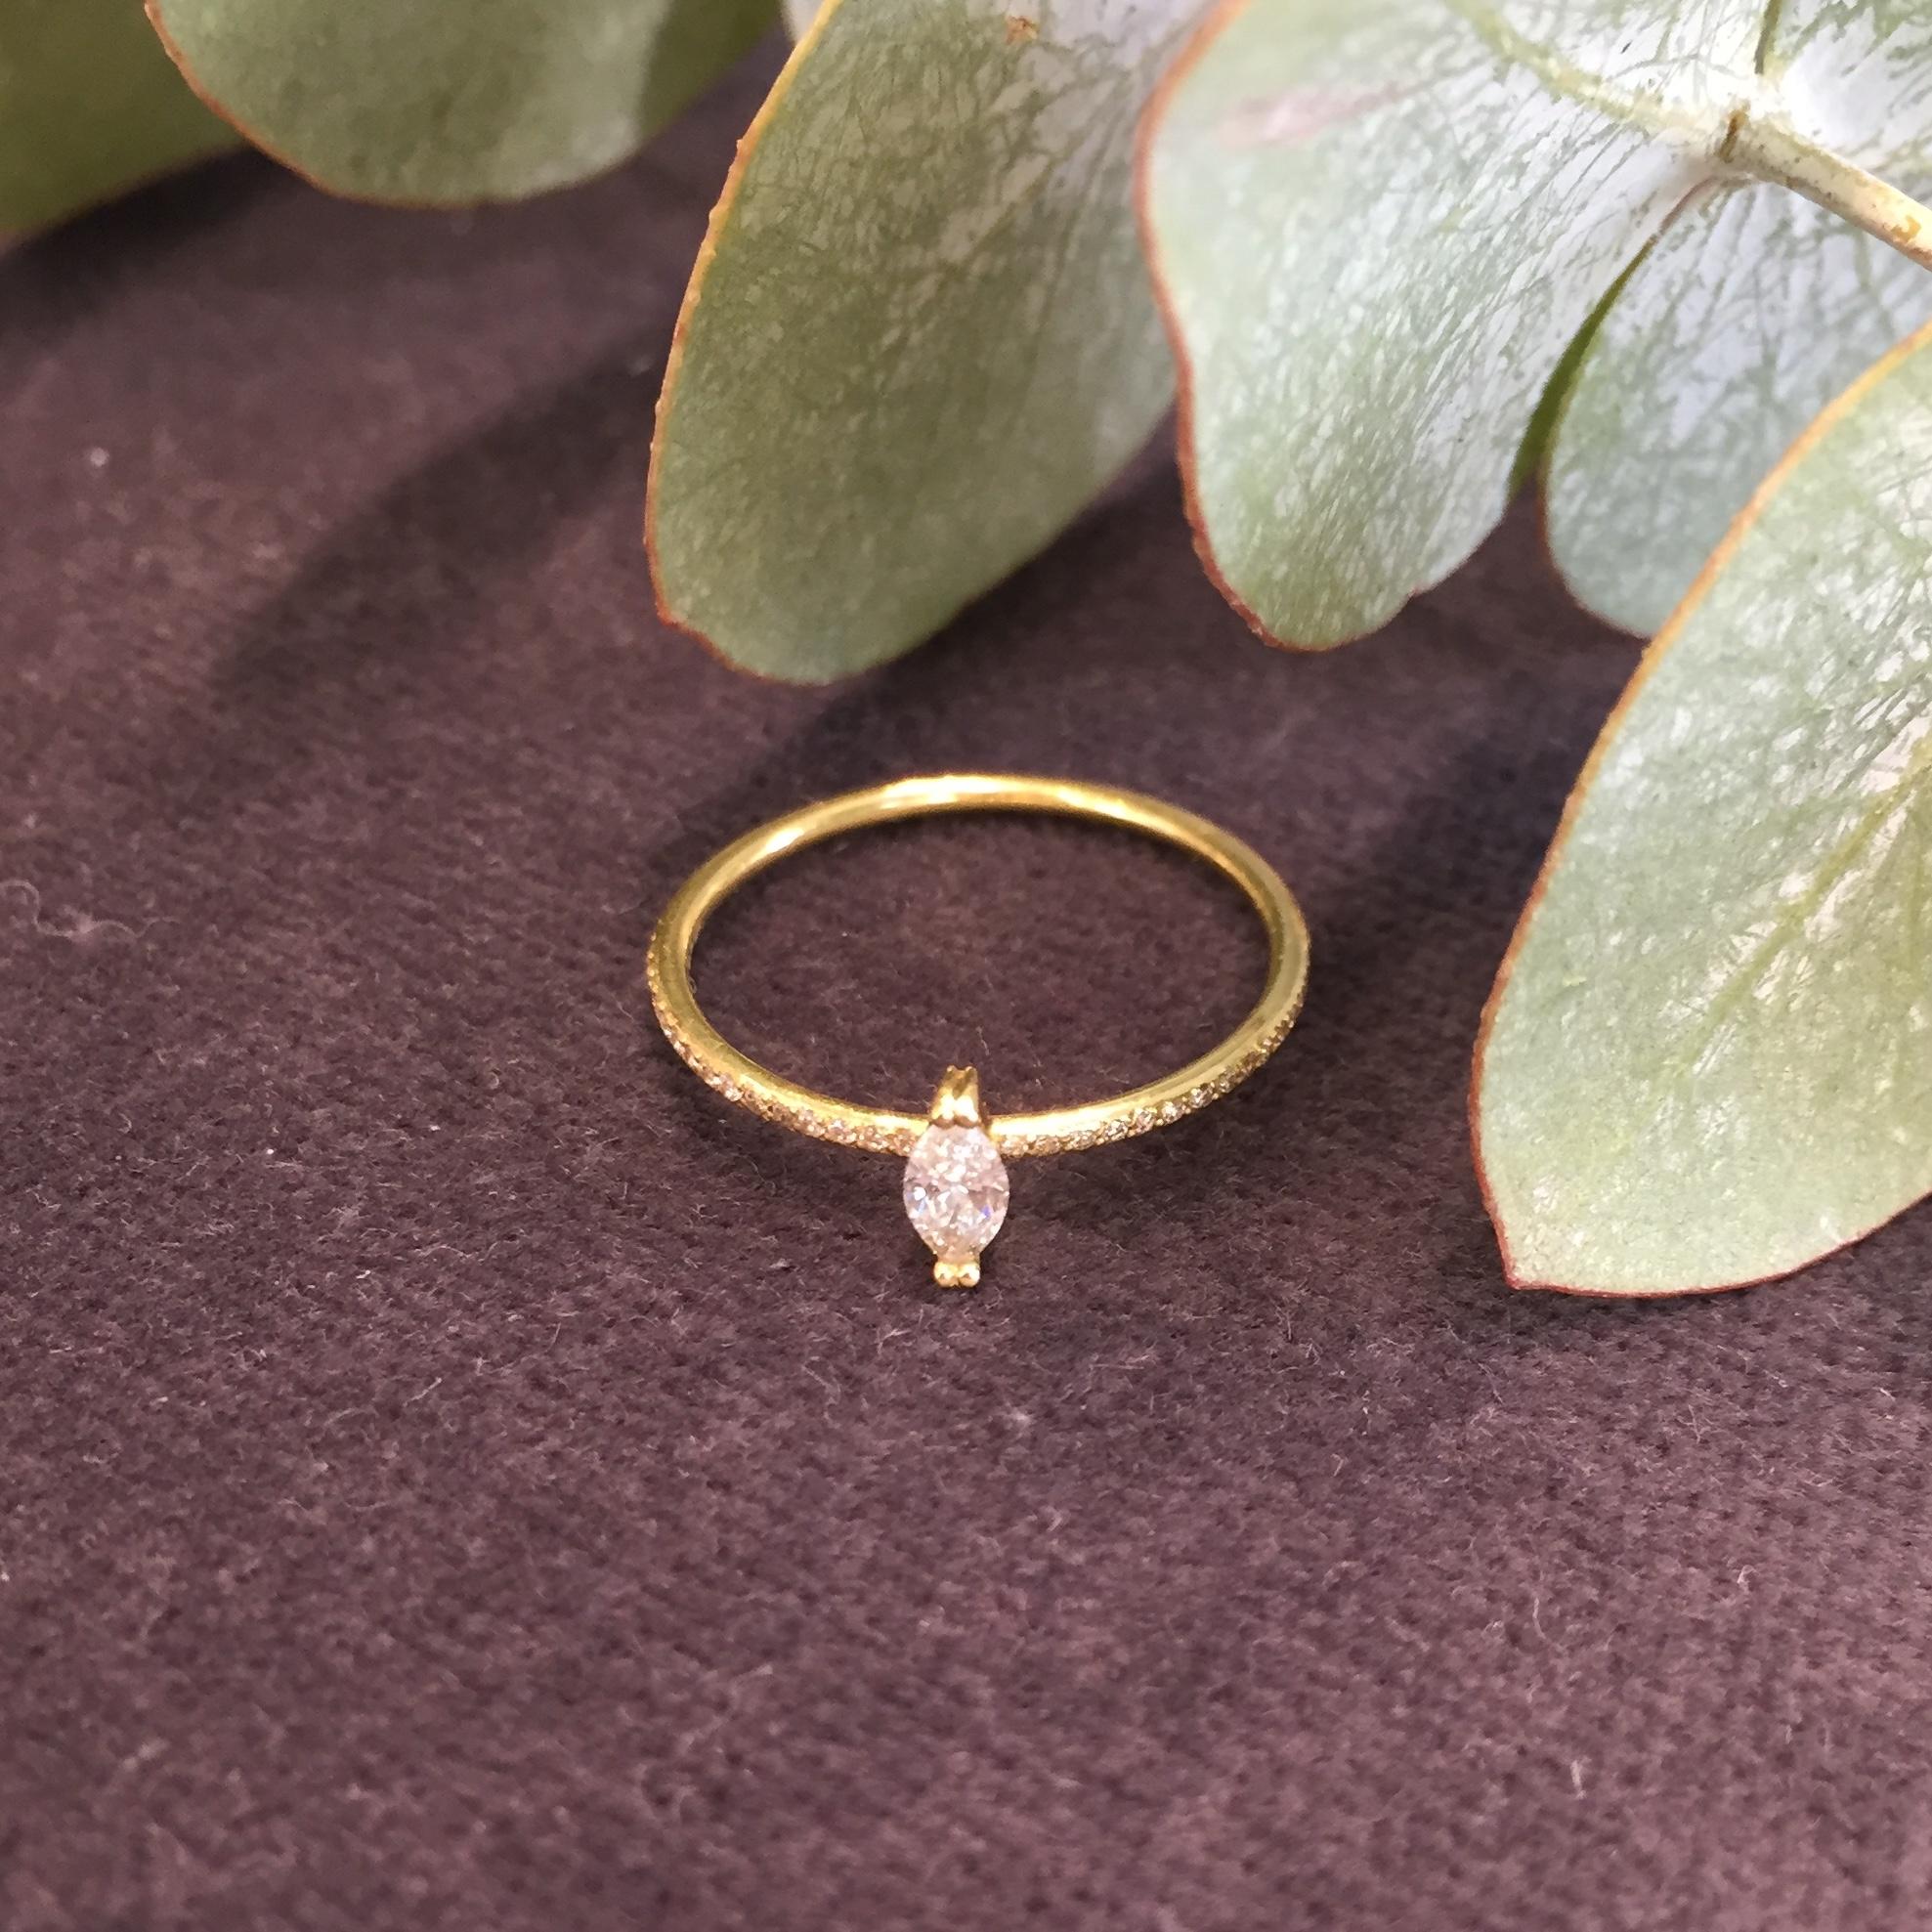 This is a timeless classic engagement ring made from 18k yellow gold. The delicately claw set 0.12carat marquise white diamond sits perfectly on a 1.2mm pave set white diamond eternity band. This piece is a UK ring size L, due to the fully diamond